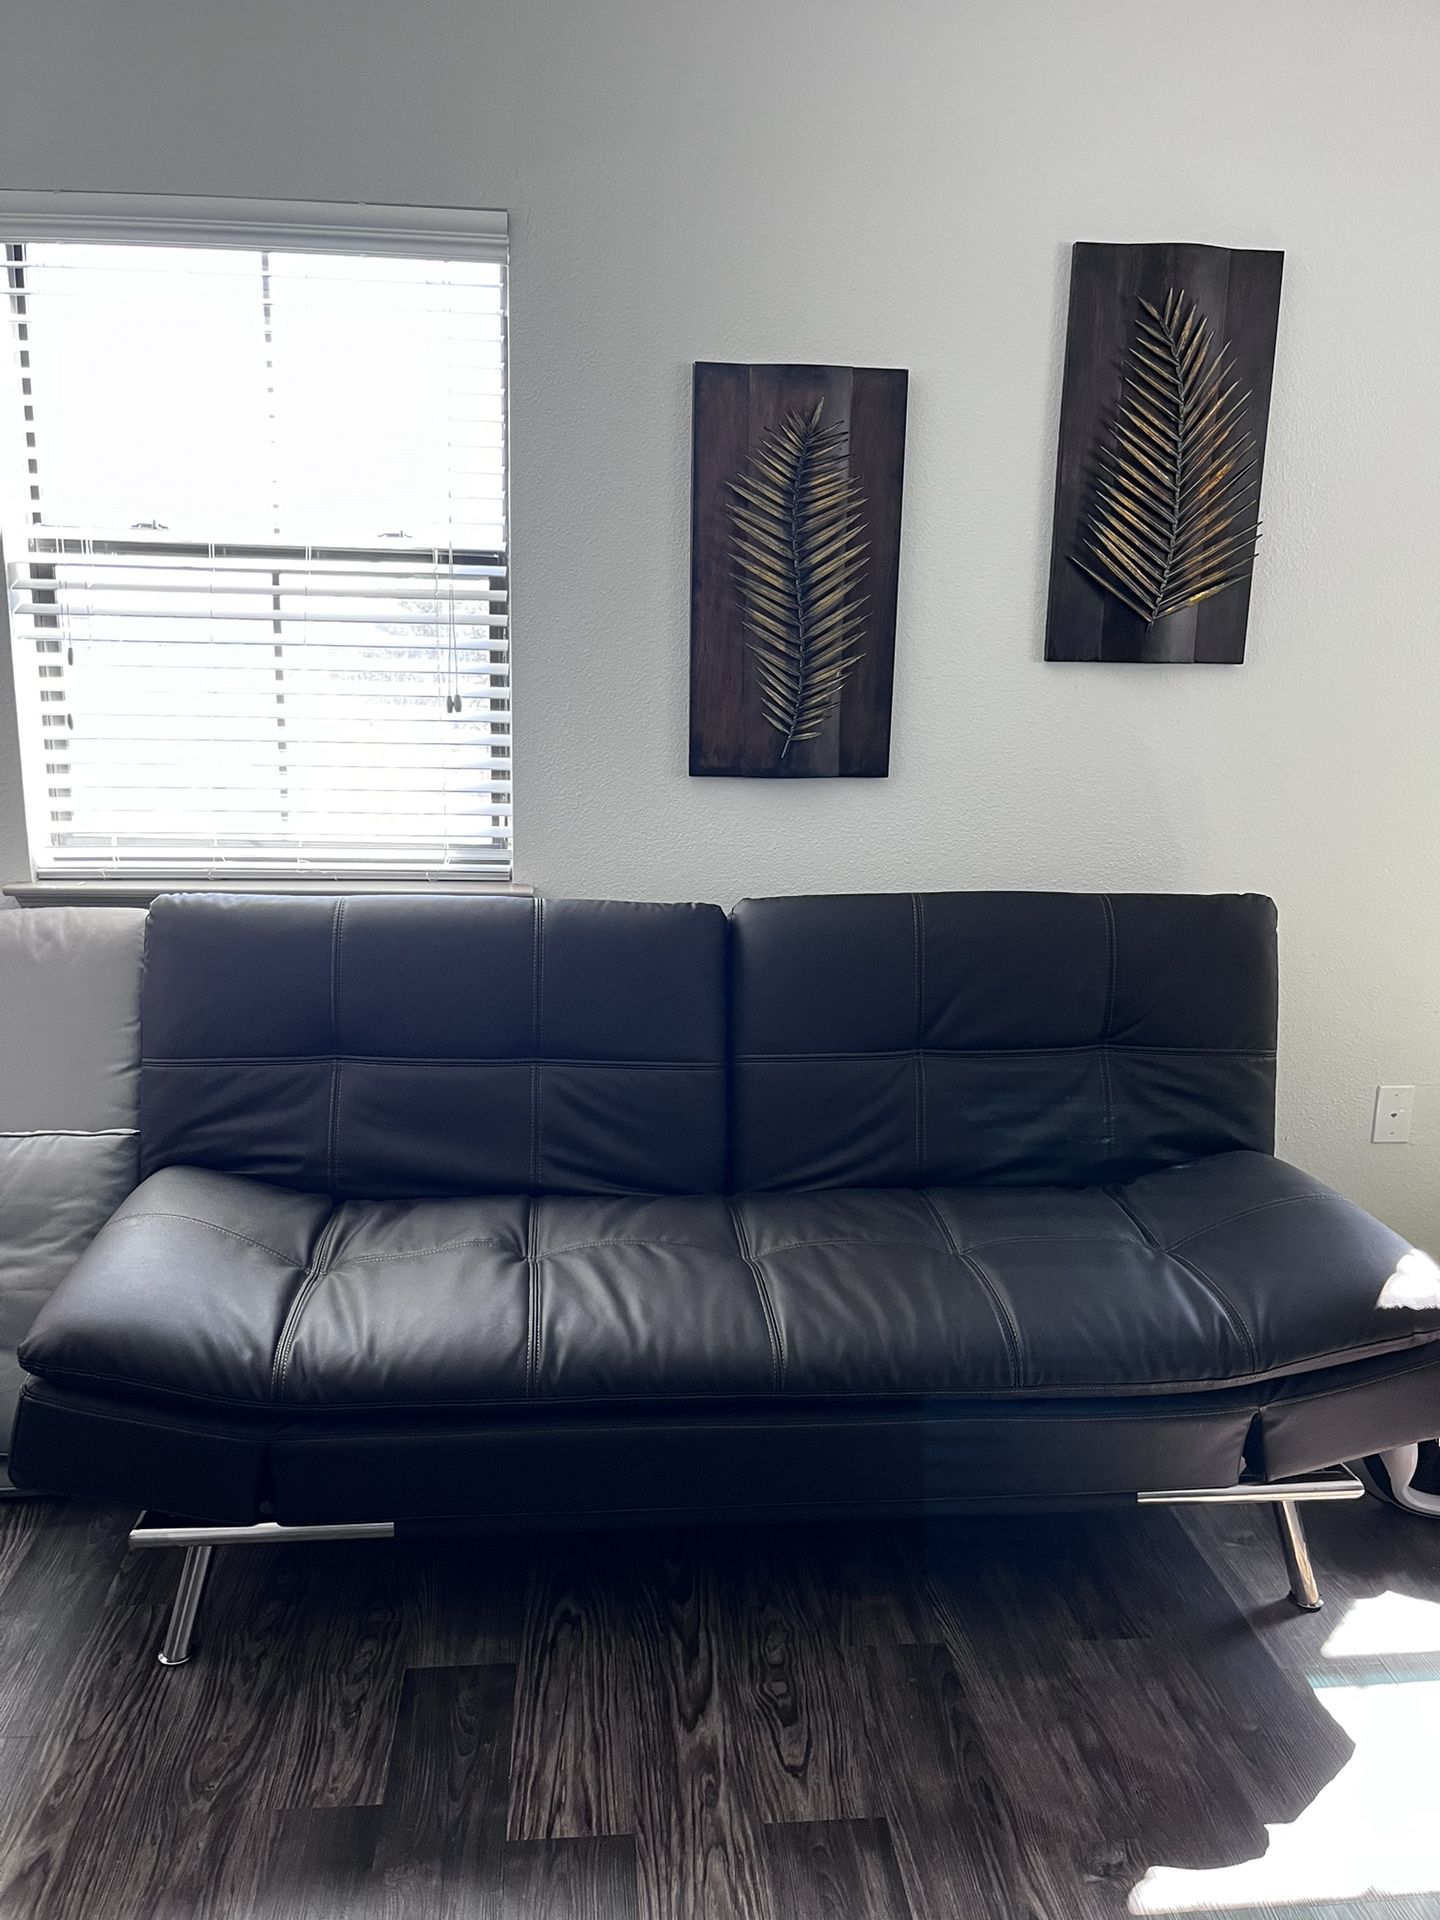 Leather Euro Lounger And Metal Wall Art